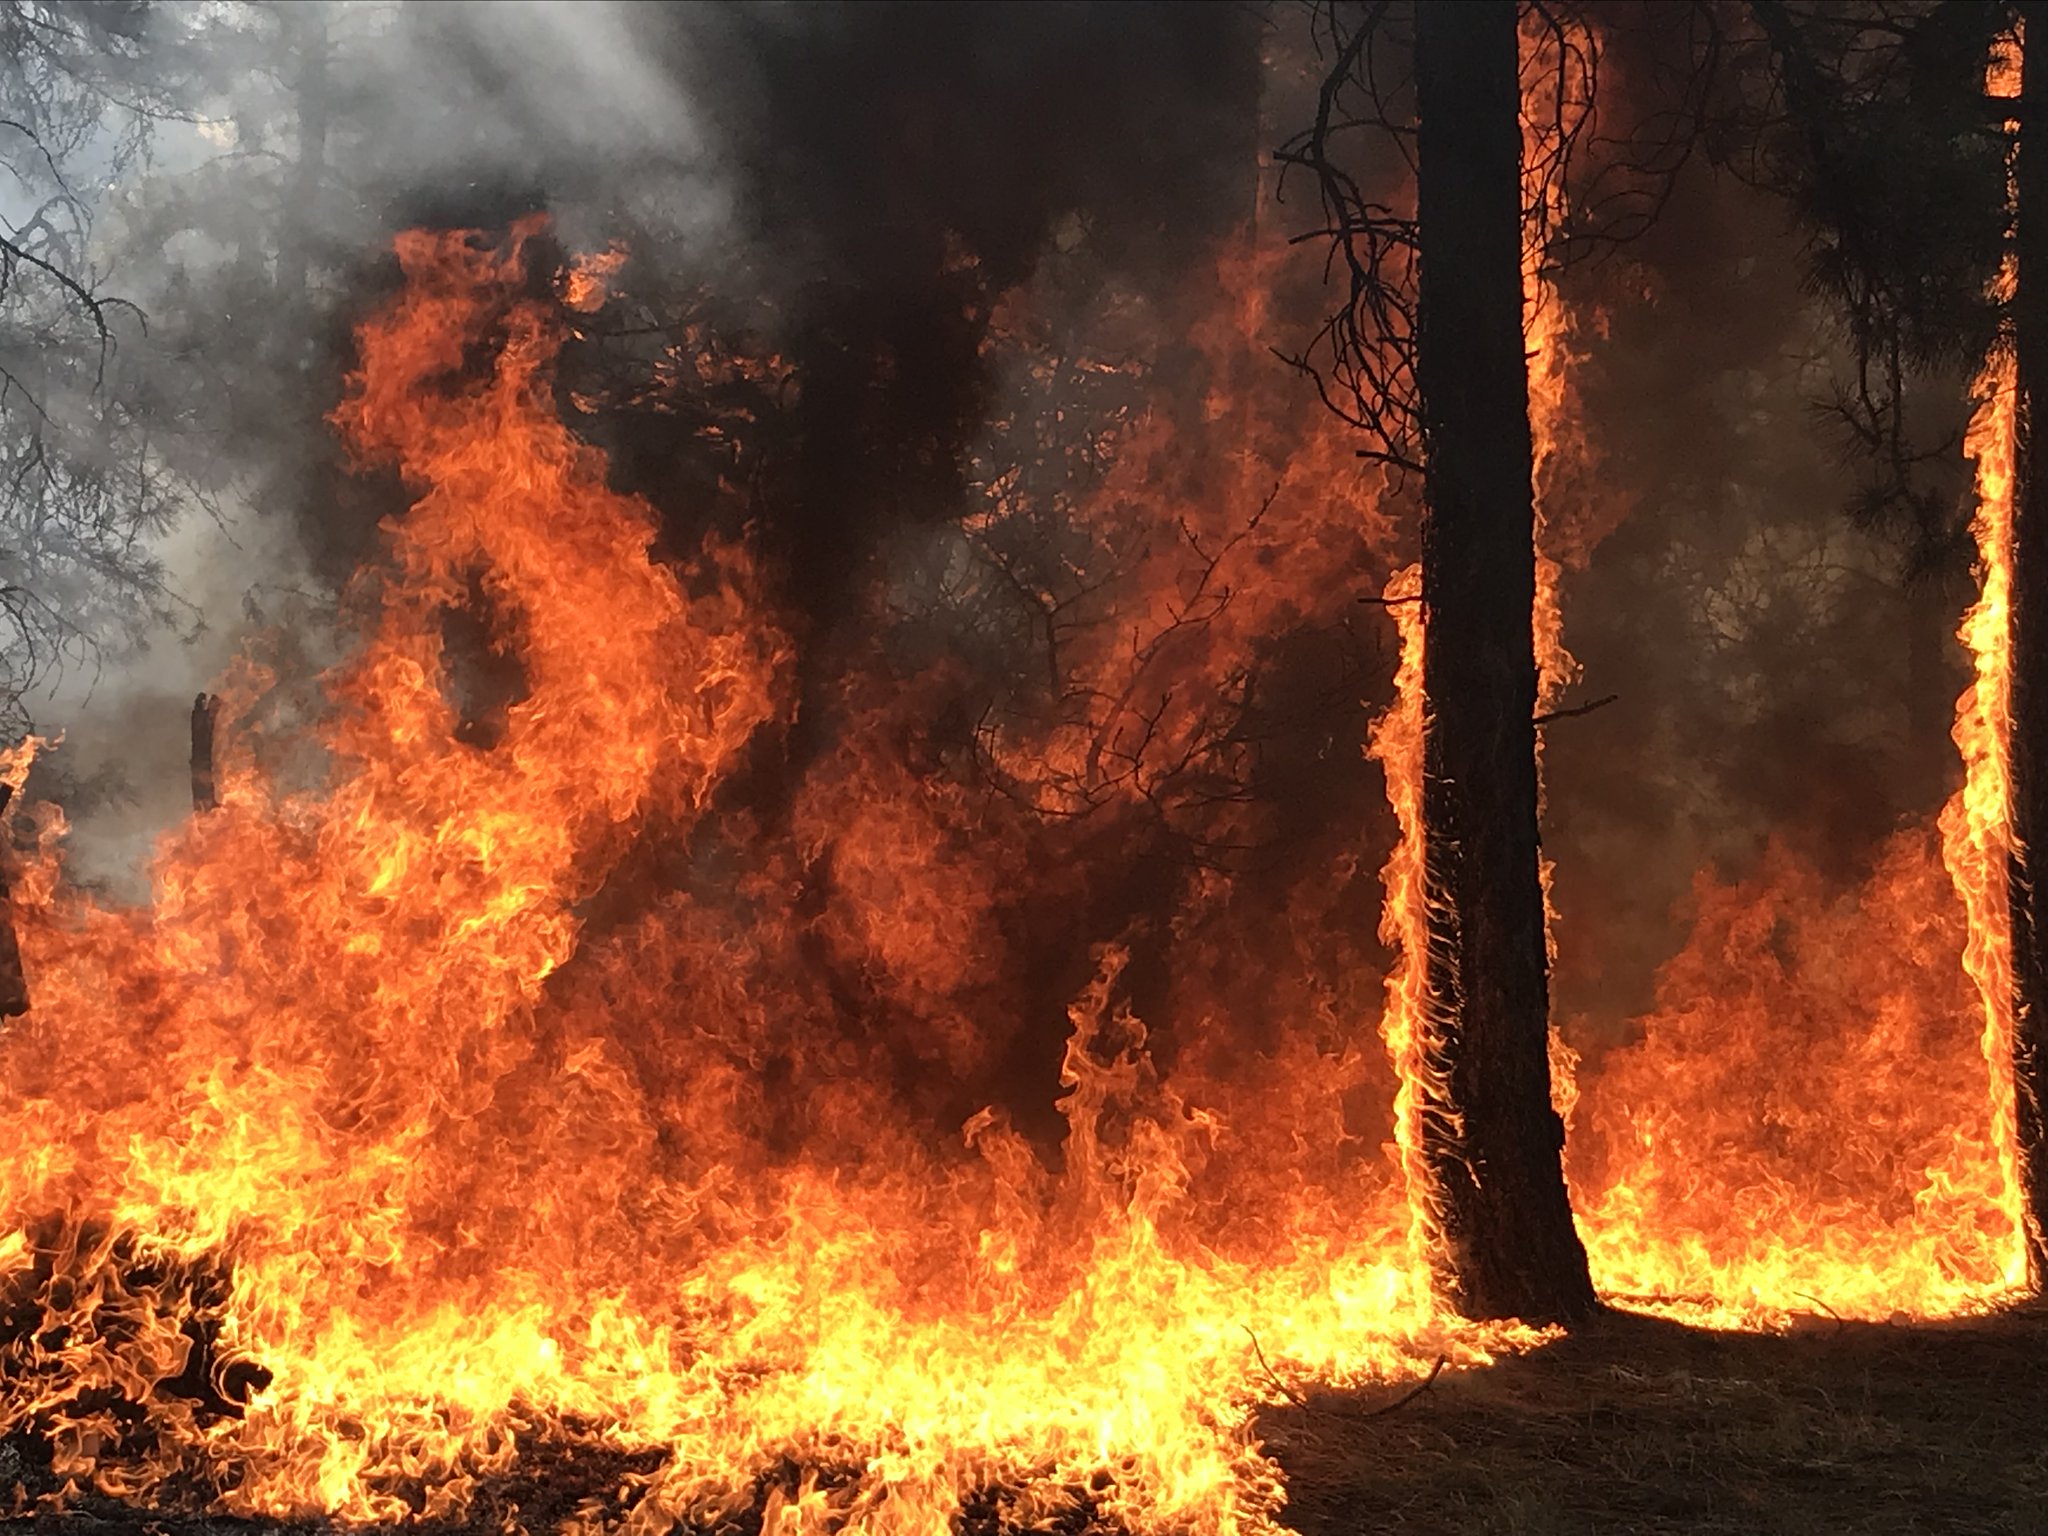 Extreme fire behavior on the Mangum Fire for June 12, 2020. Photo Credit: Kaibab National Forest